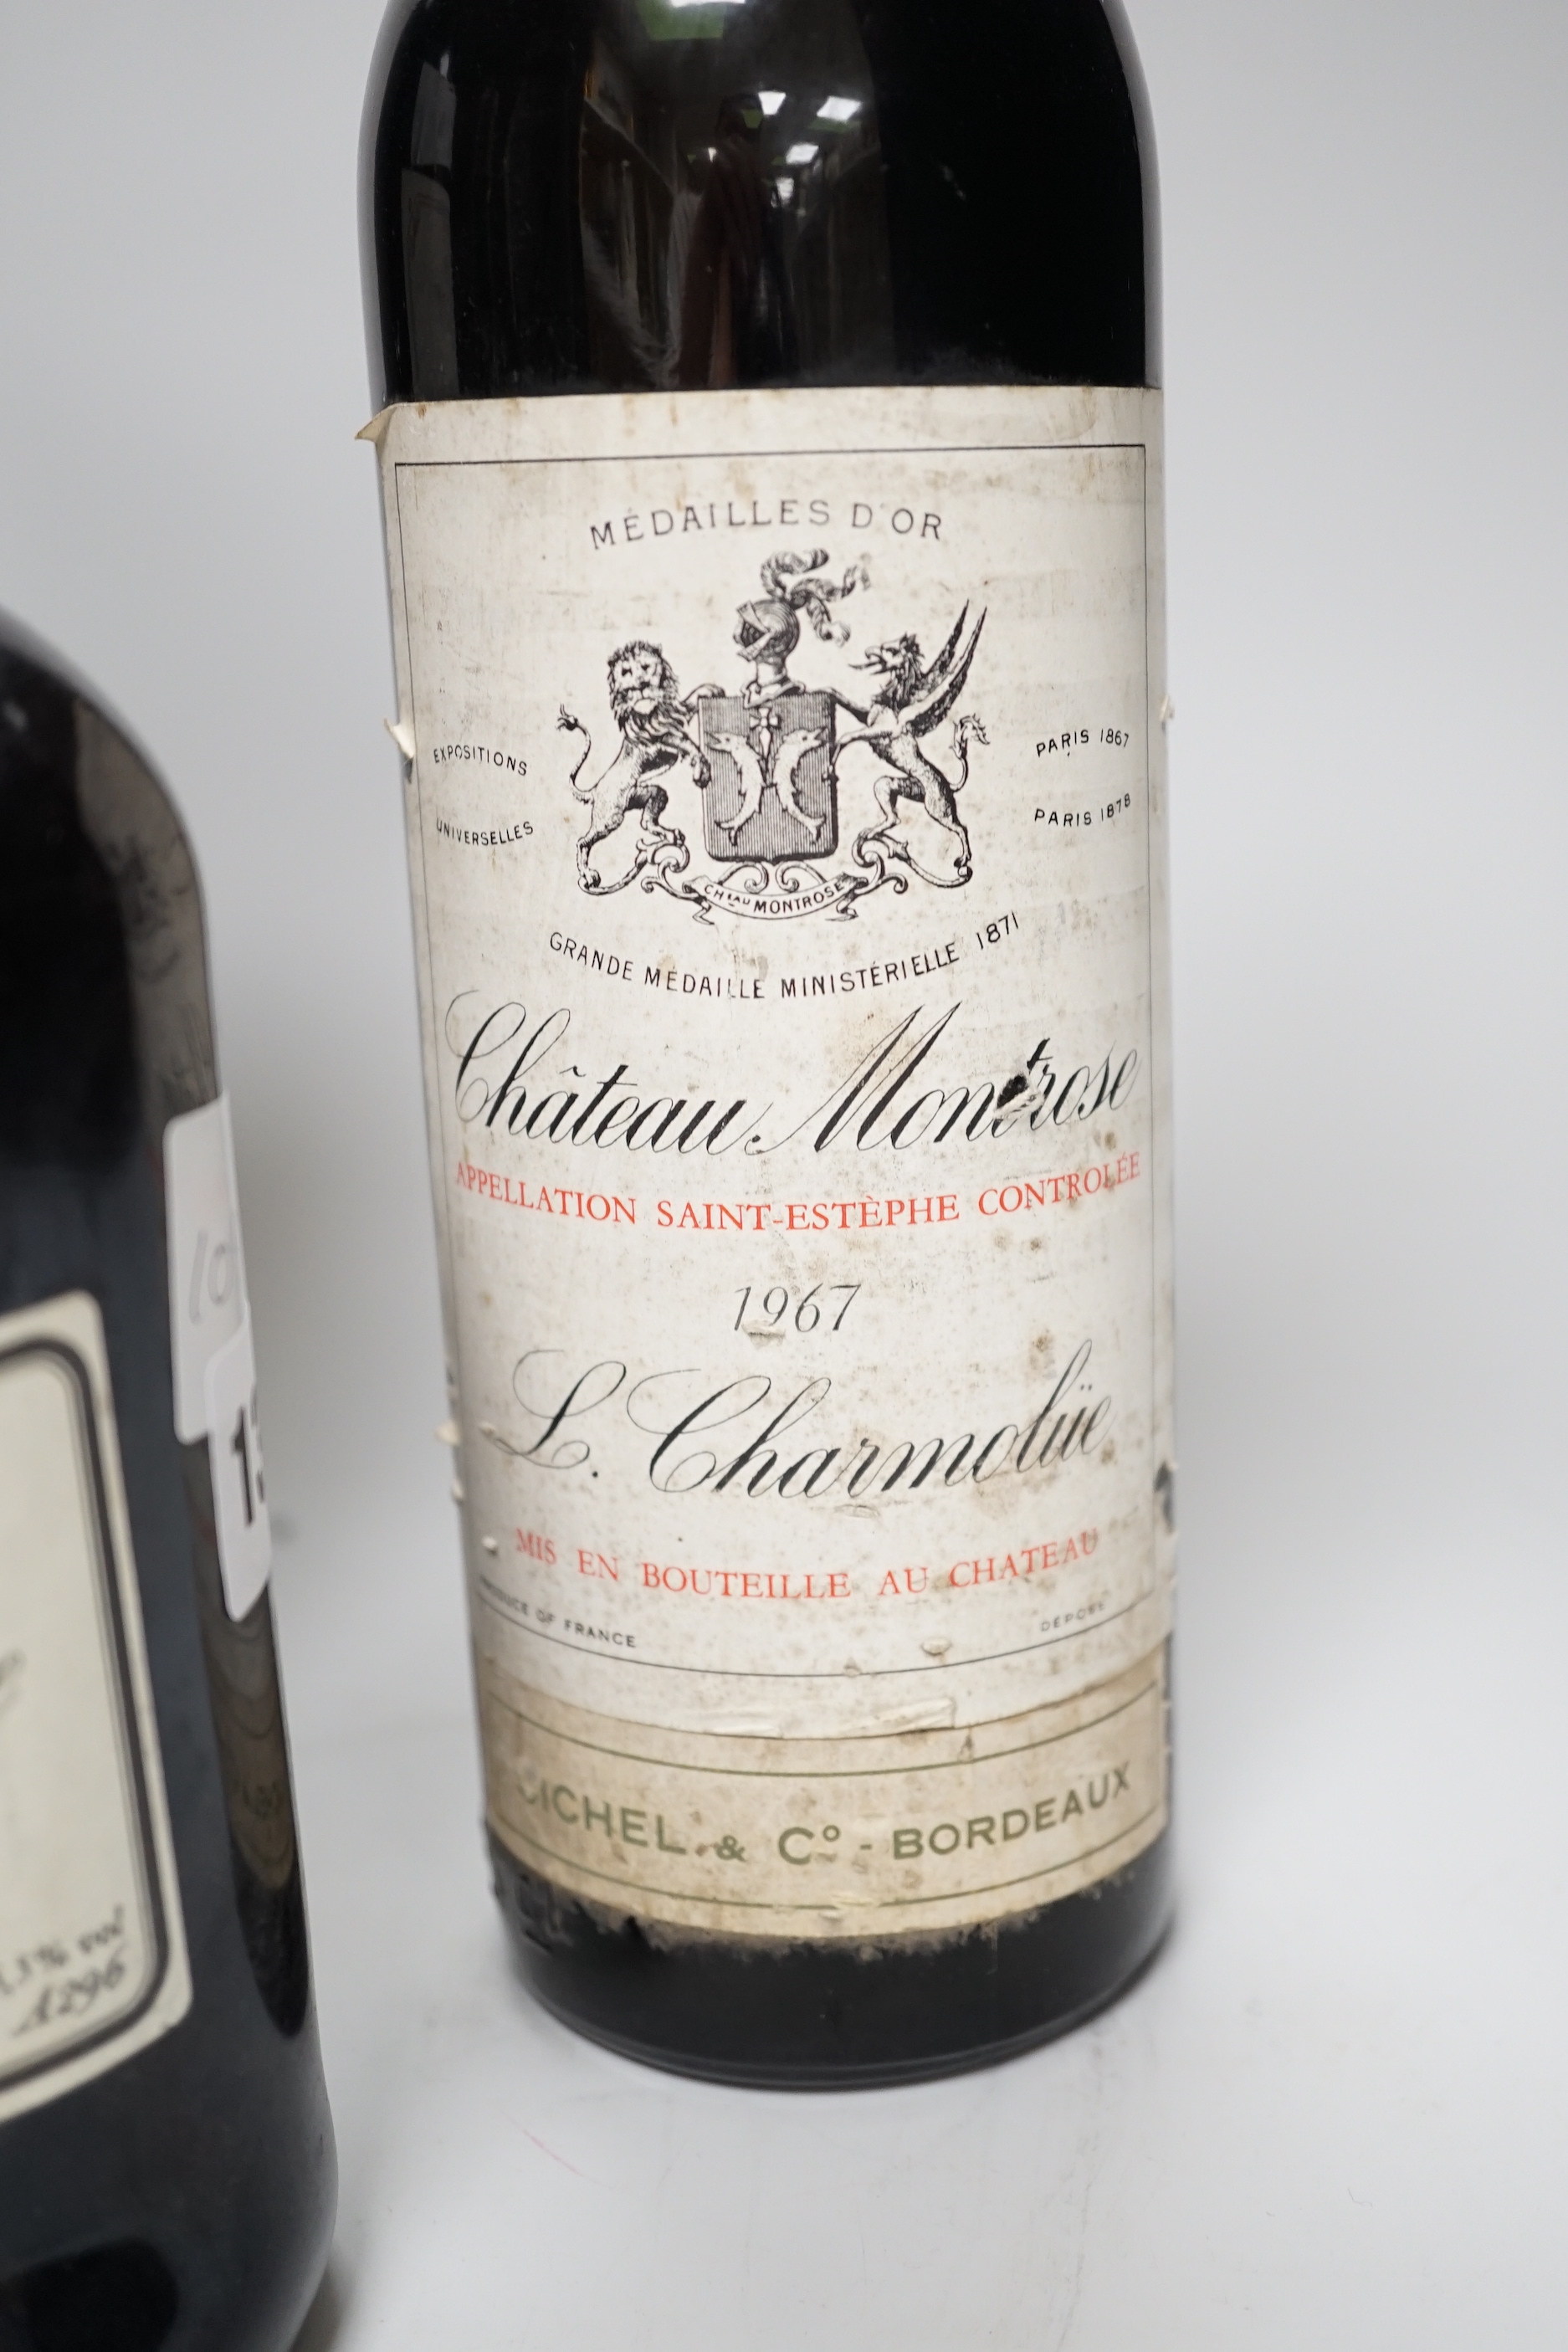 A magnum of Chateau Latour, 1983 and three other bottles of wine including Chateau Montrose, 1967.